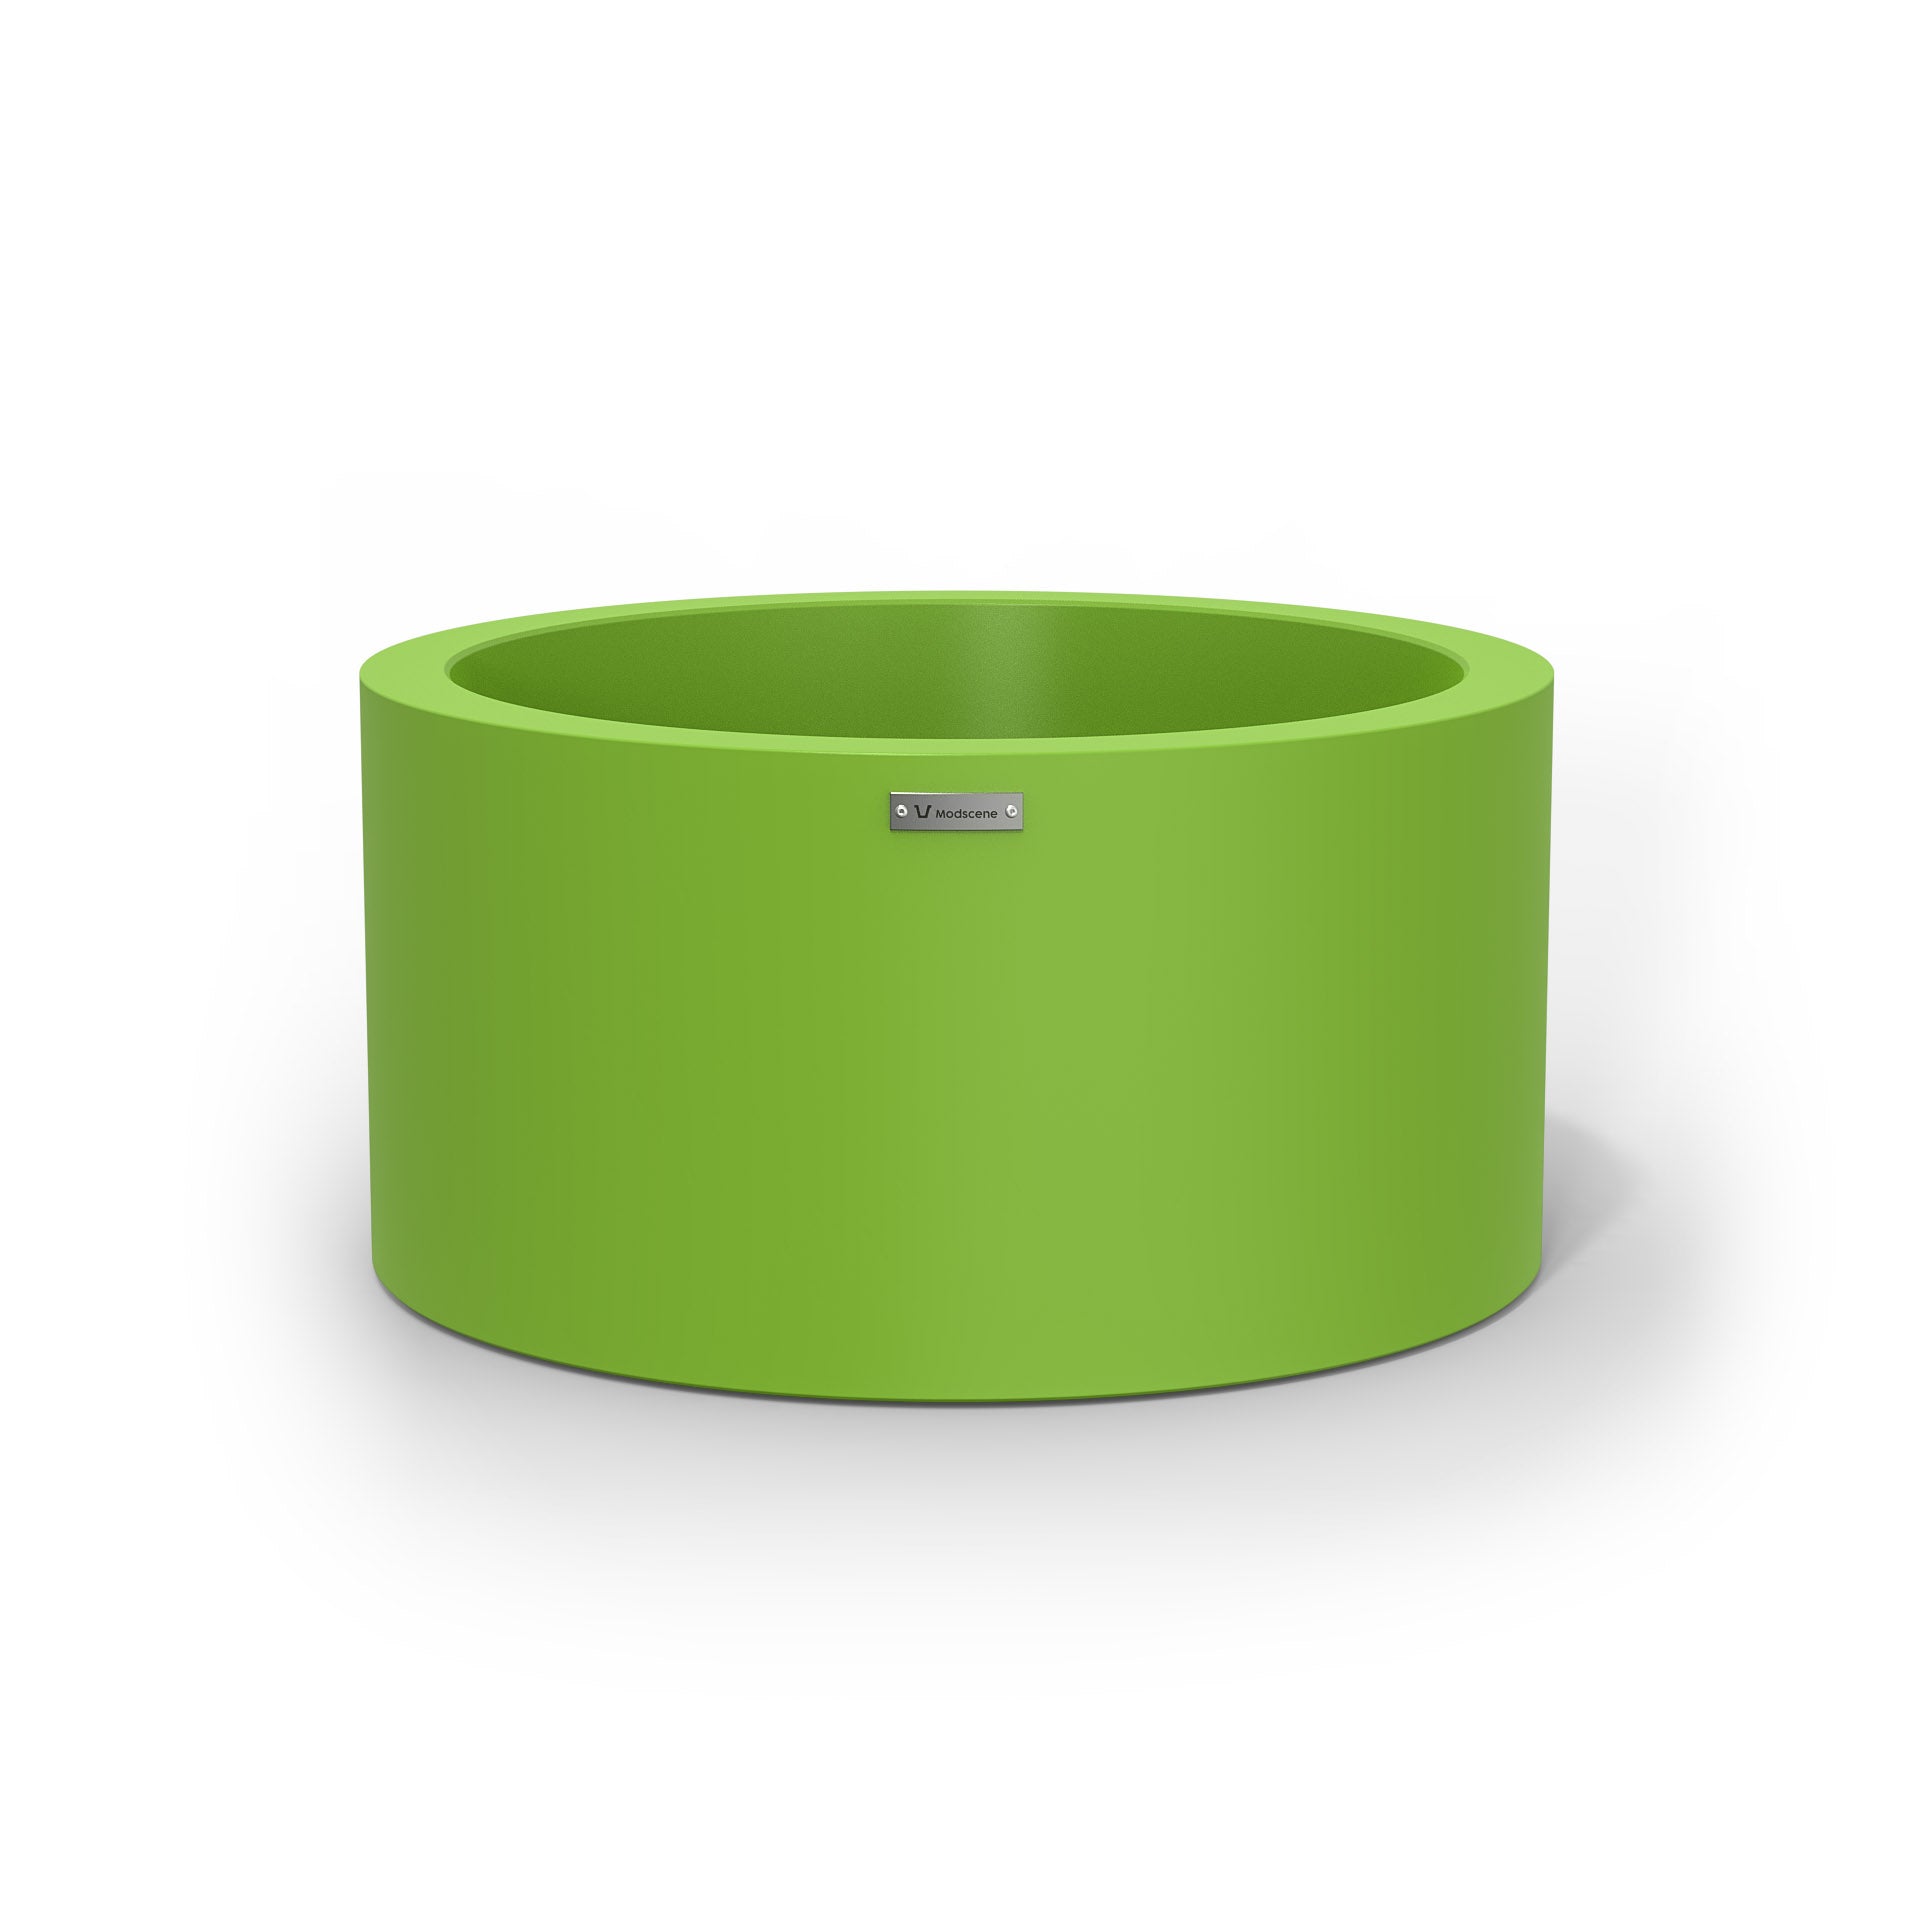 A green cylinder pot planter made by Modscene.